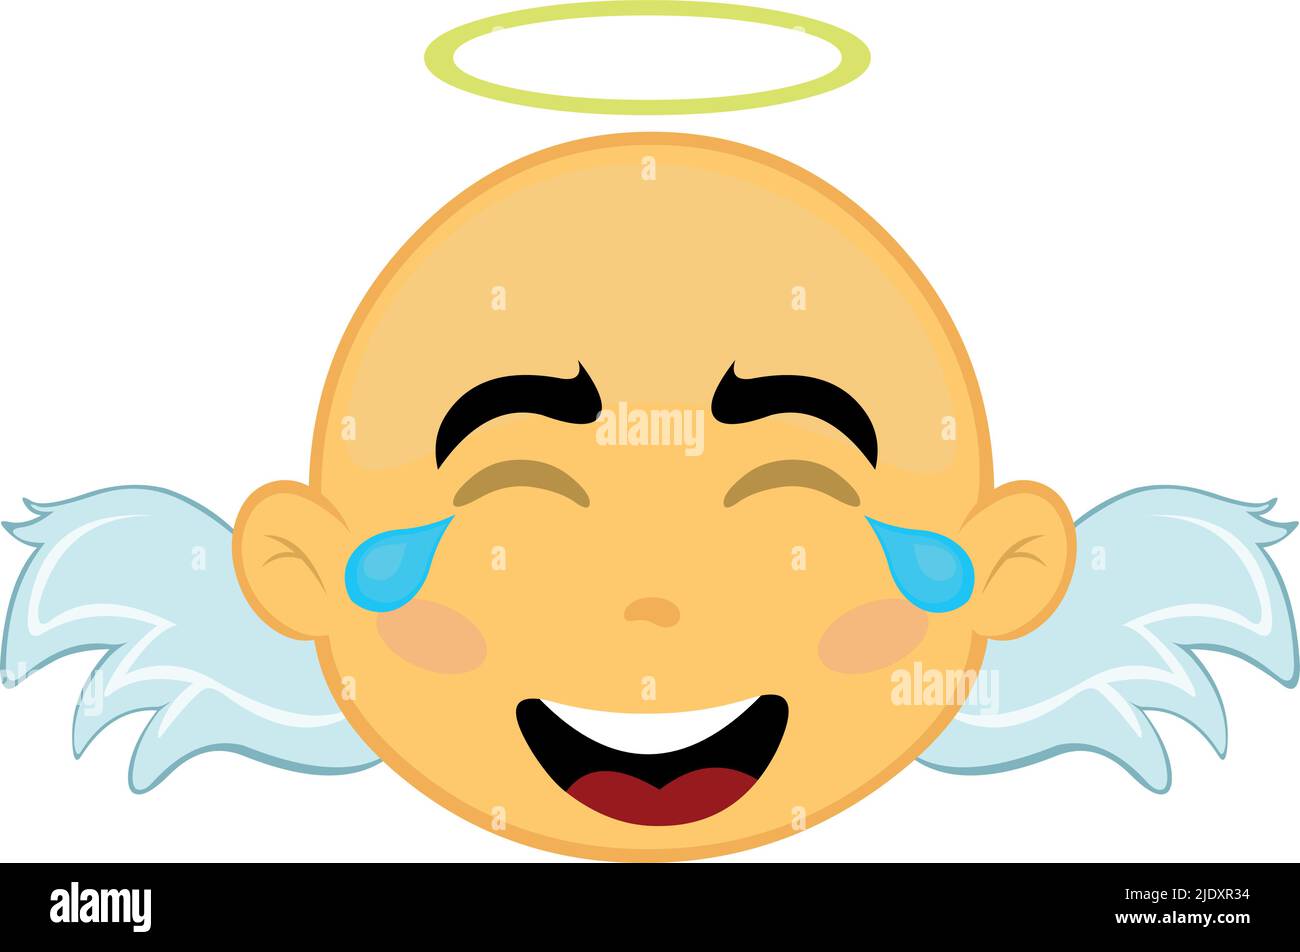 Vector illustration of a yellow cartoon angel face with tears of joy and laughter Stock Vector